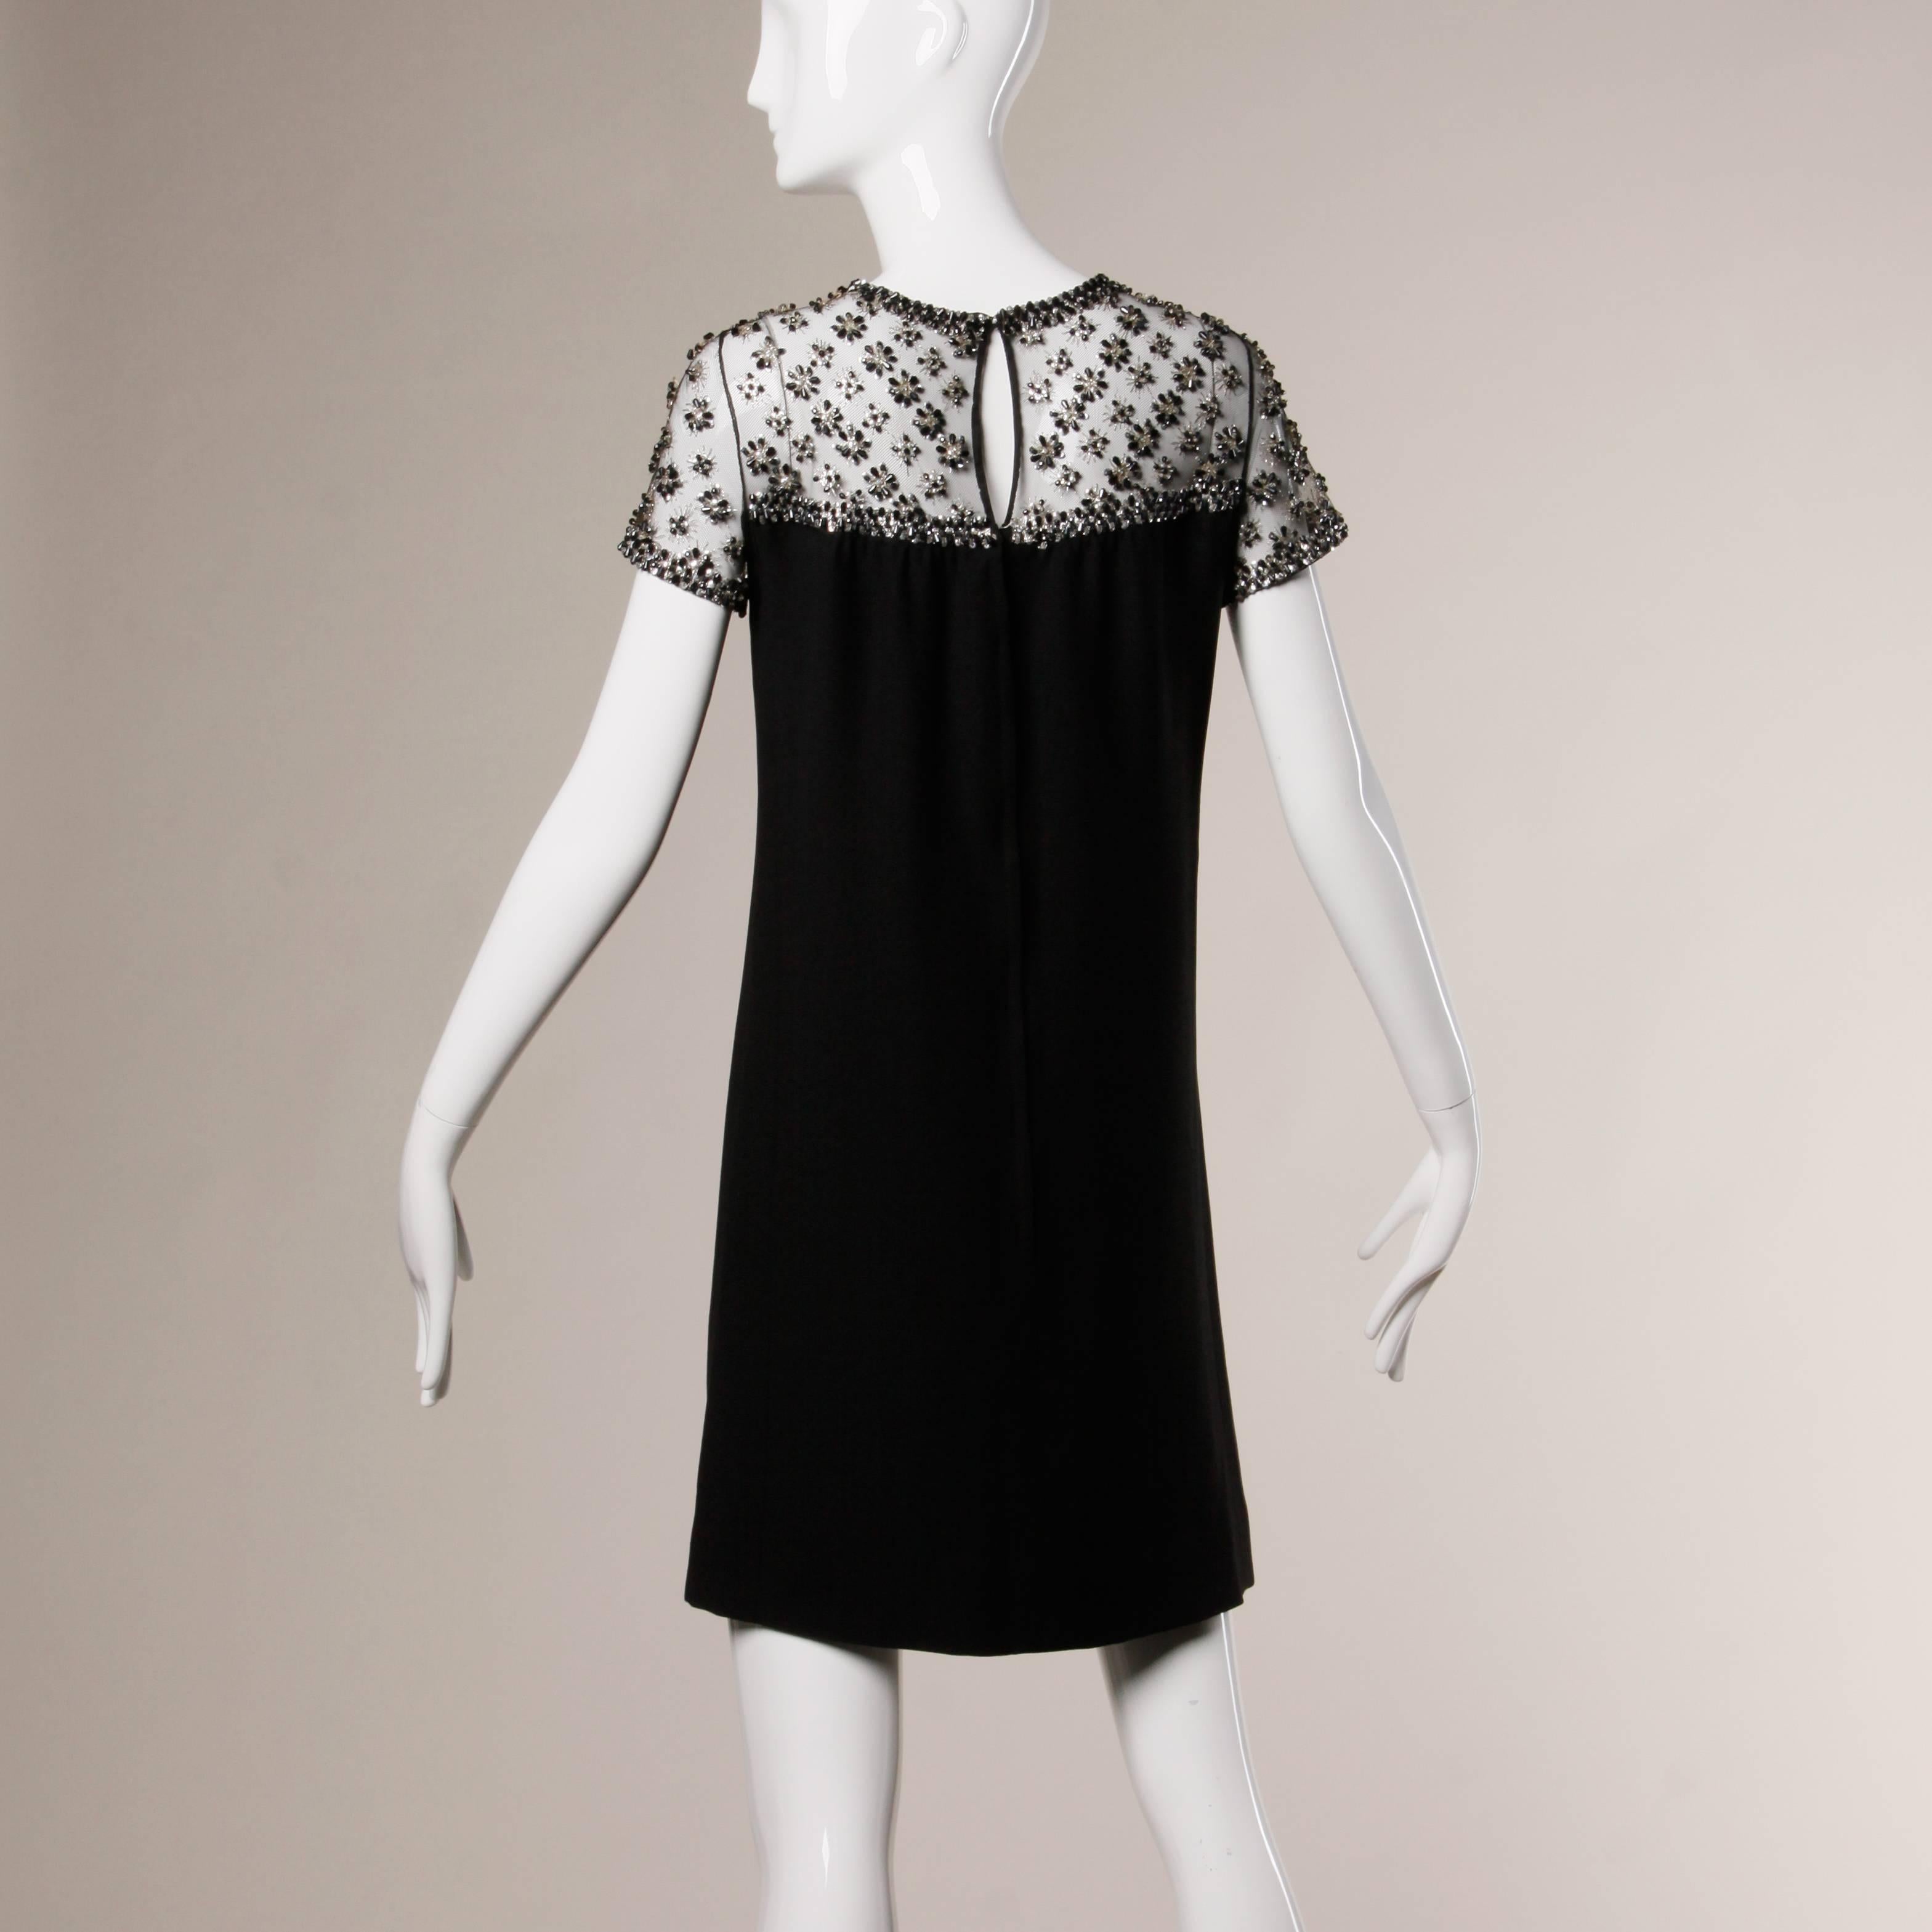 Women's 1960s Vintage Black Crepe Cocktail Dress with a Sequin + Beaded Design